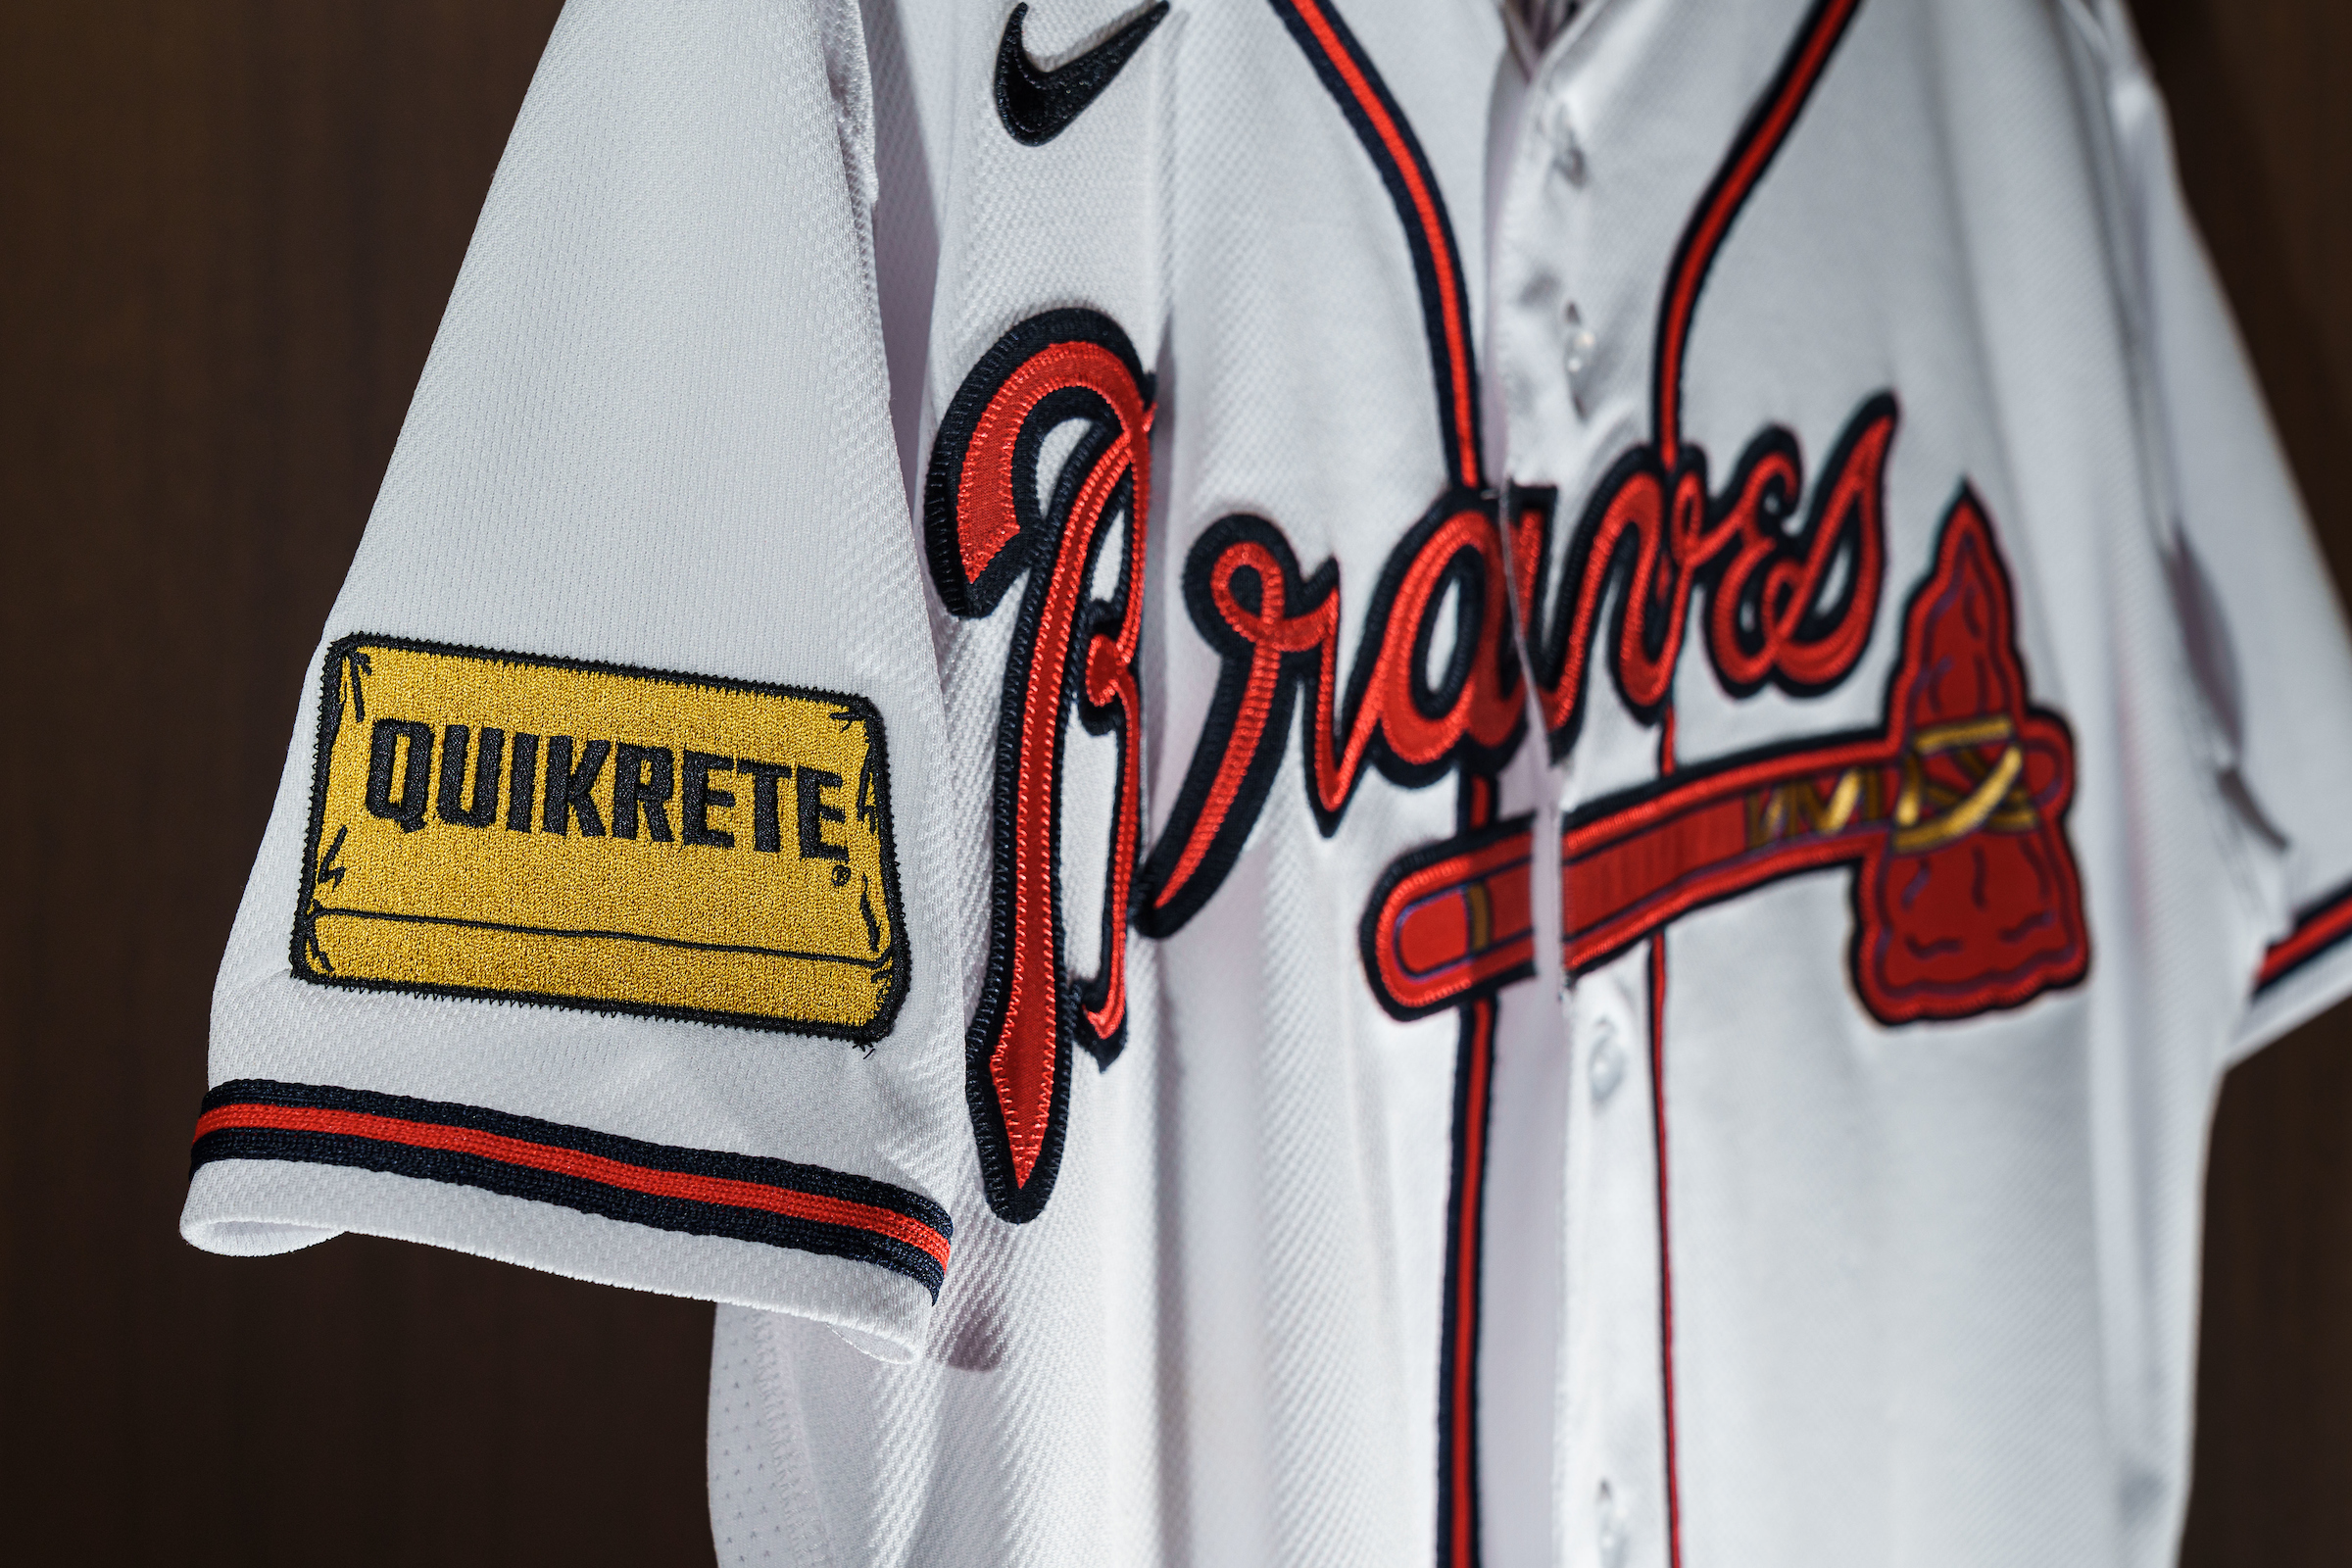 Braves add a jersey patch sponsorship, from Atlanta-based QUIKRETE